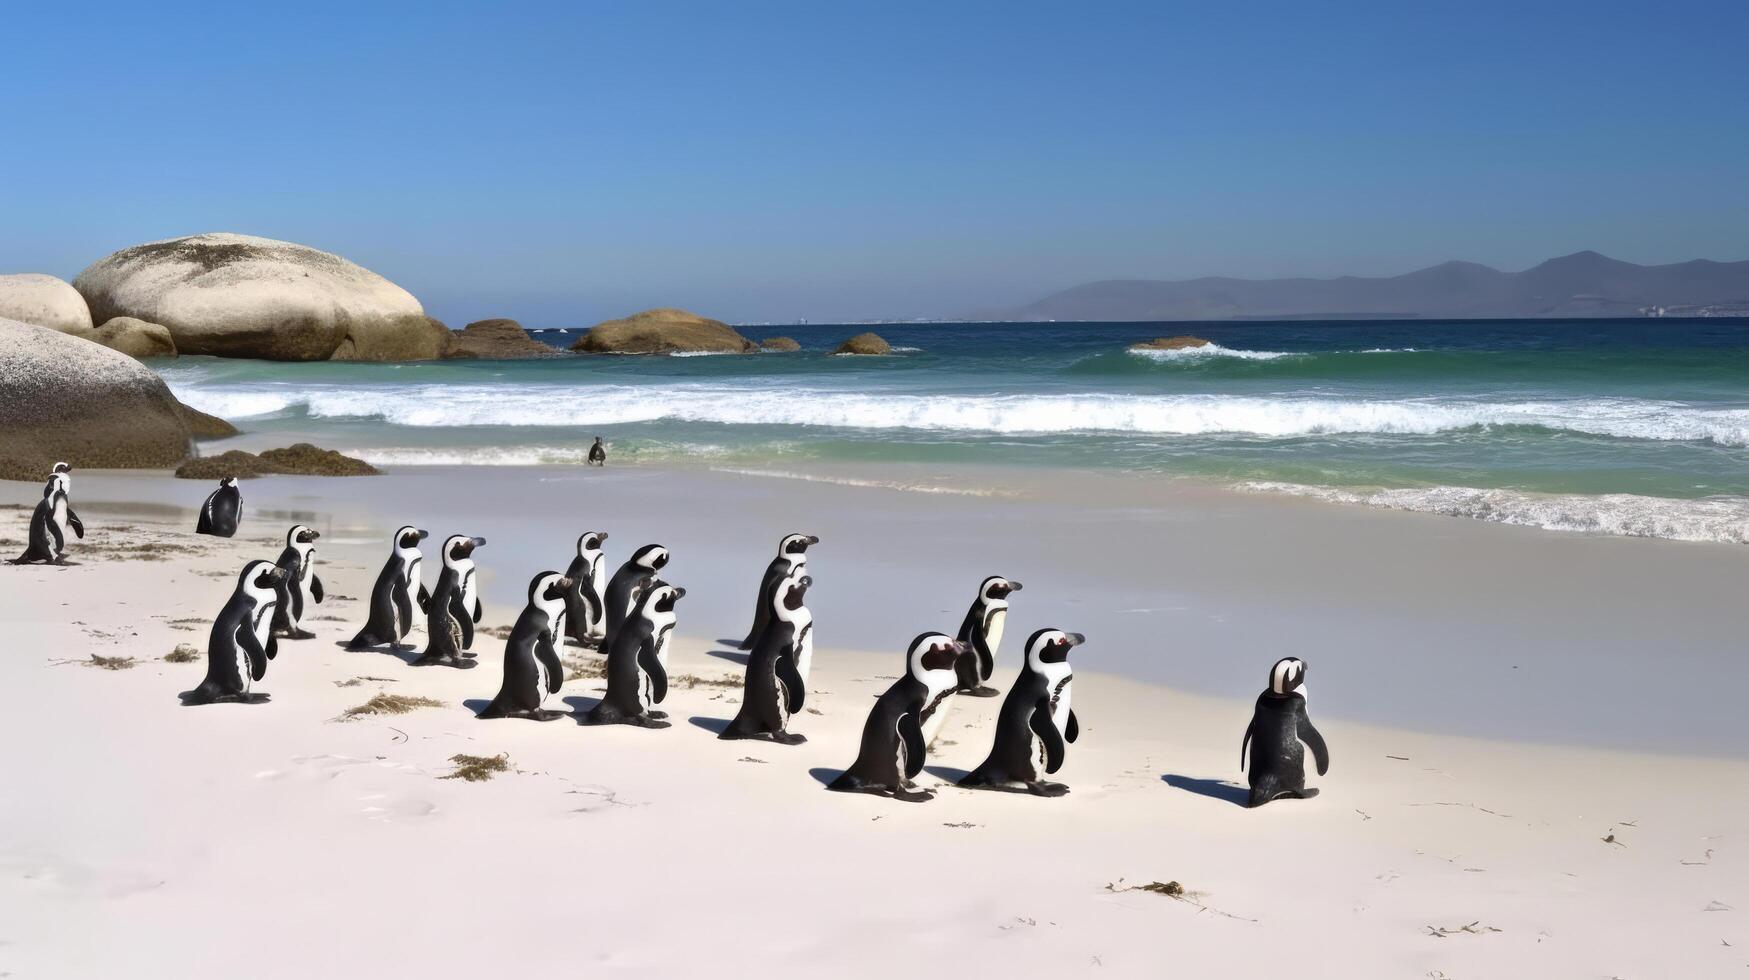 African penguins on a beach. Illustration photo